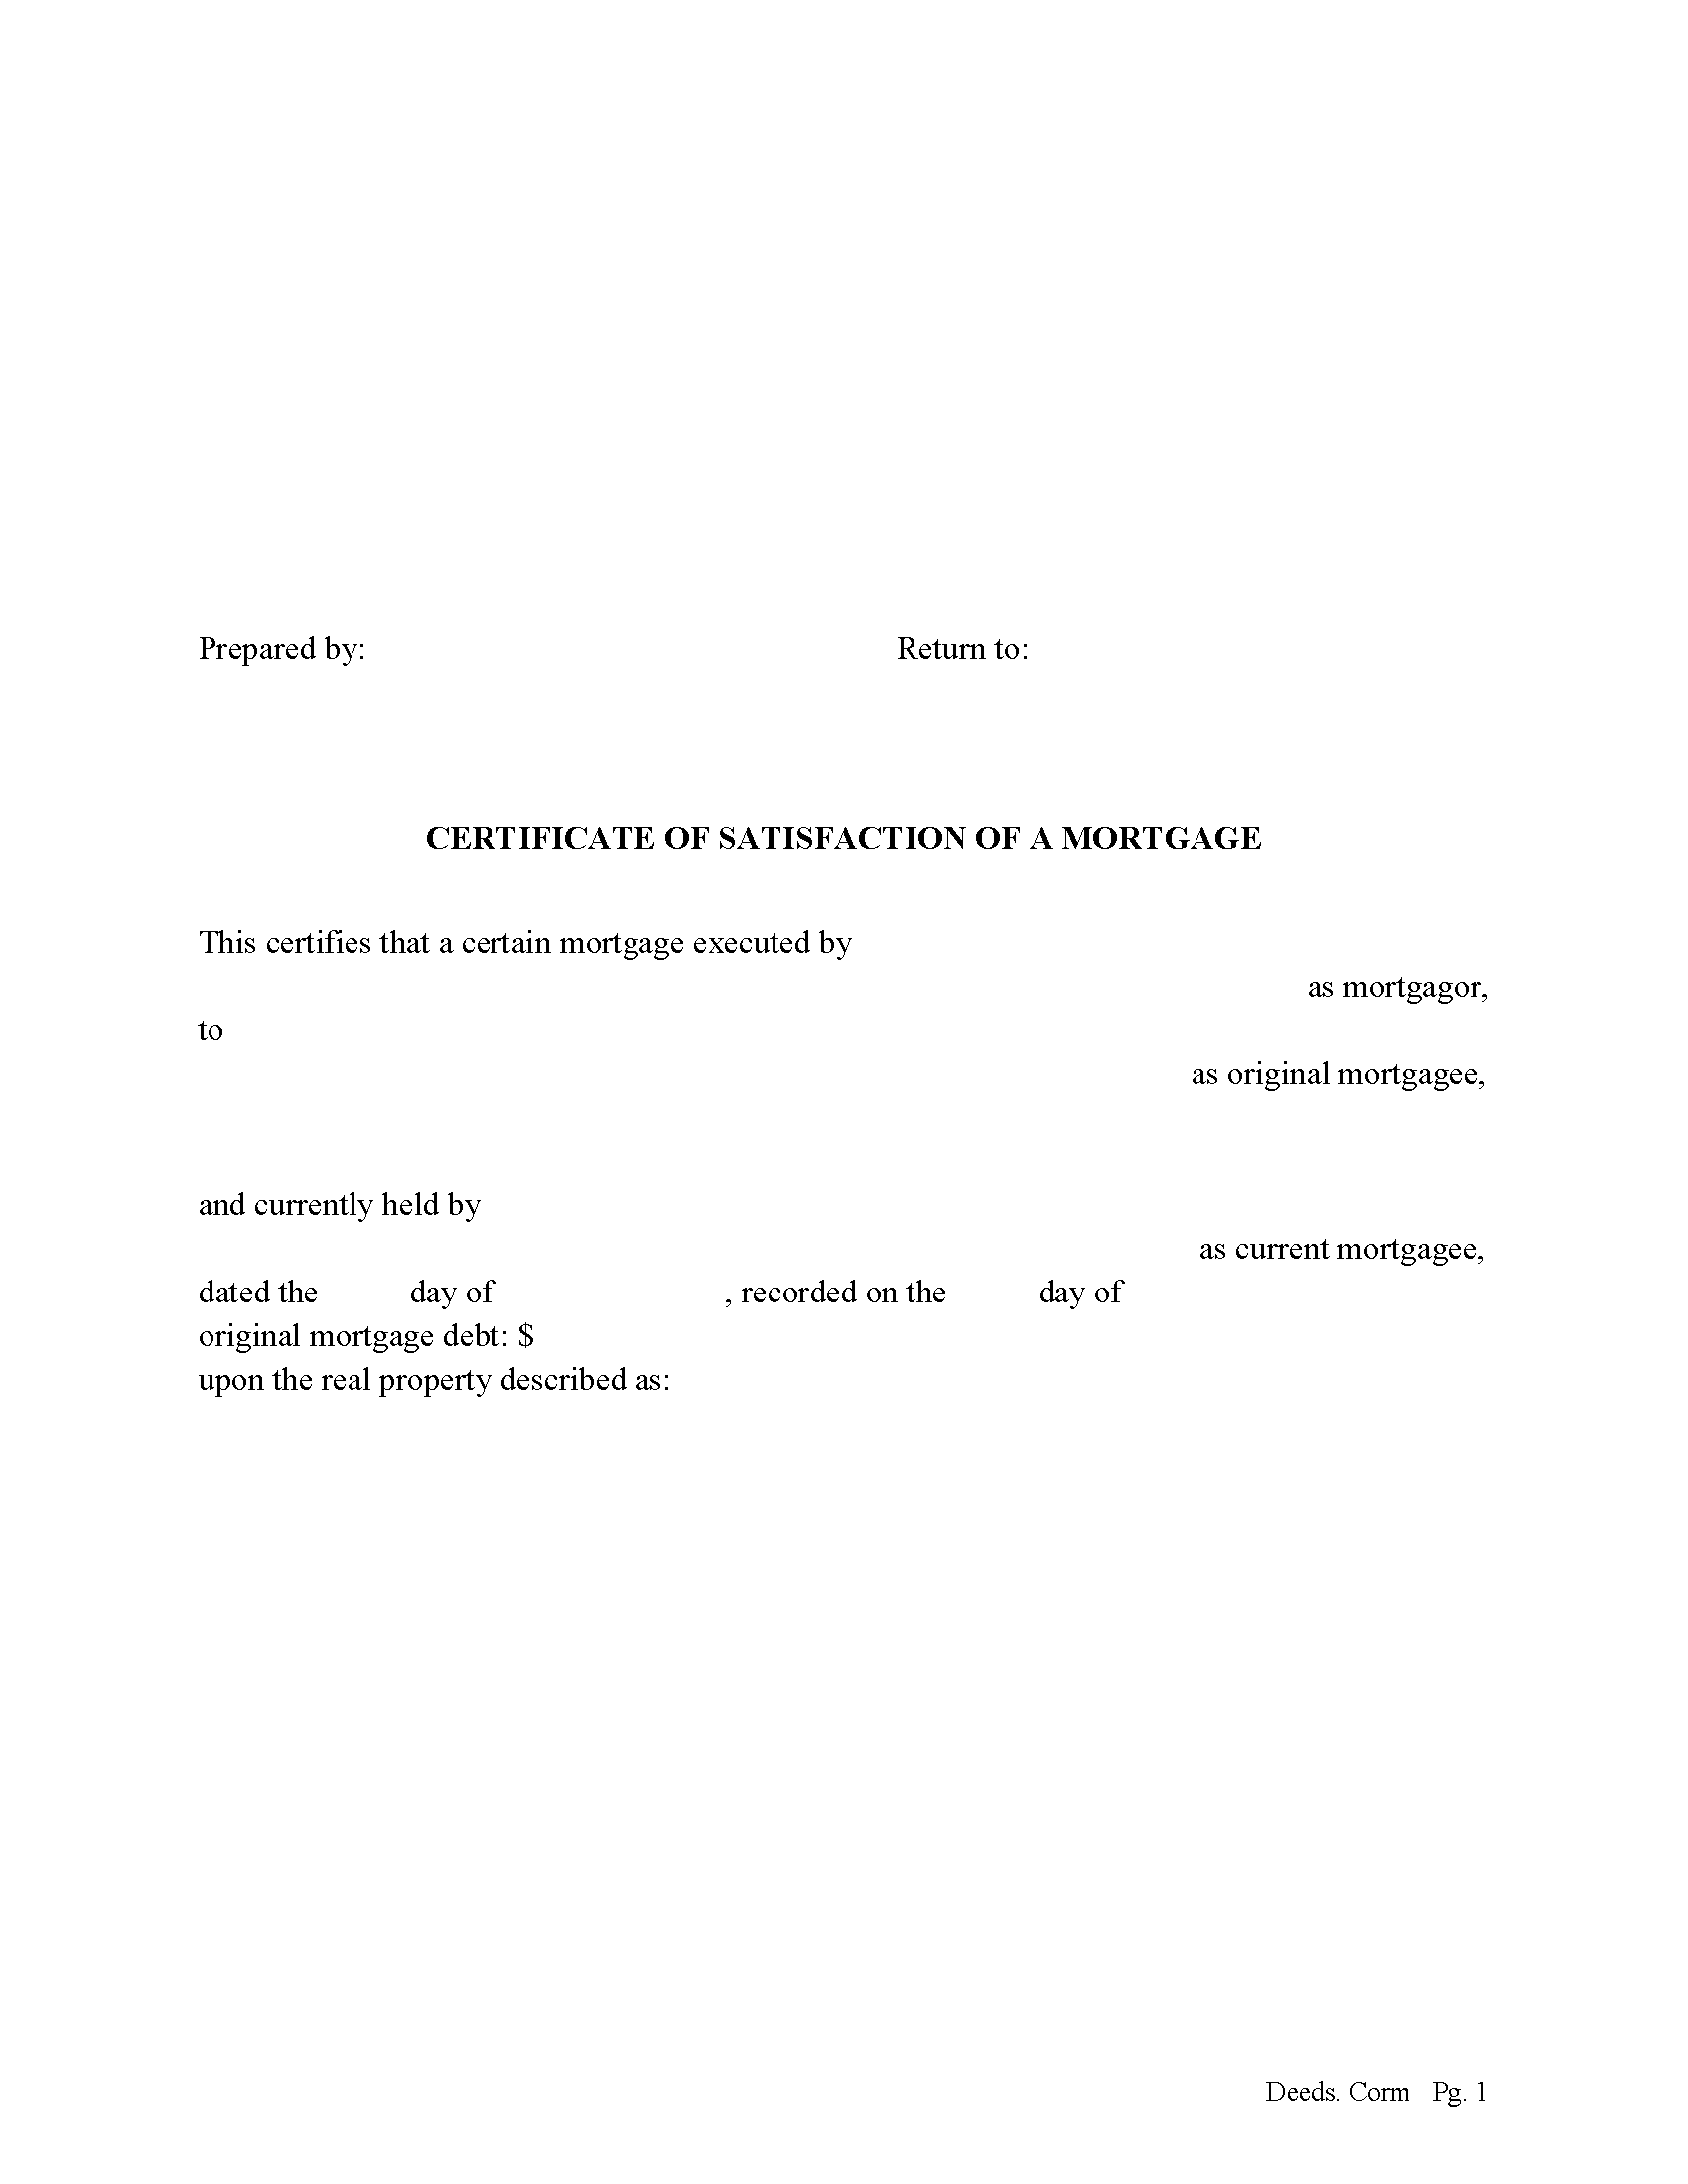 Certificate of Discharge of a Mortgage